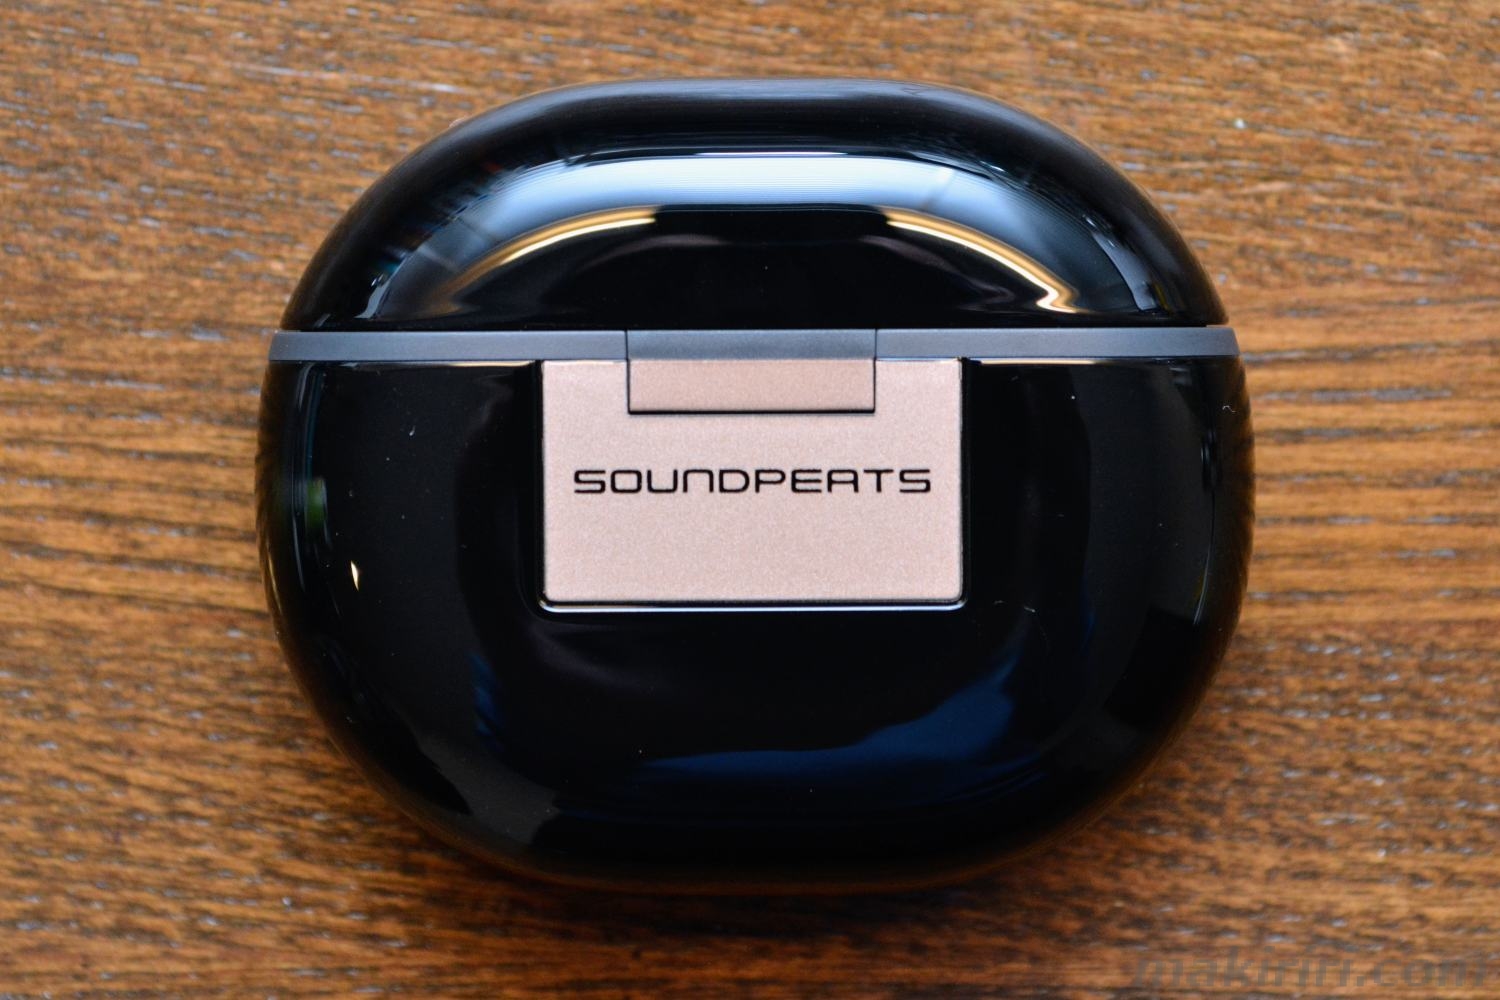 SOUNDPEATS Air3 Deluxe HS